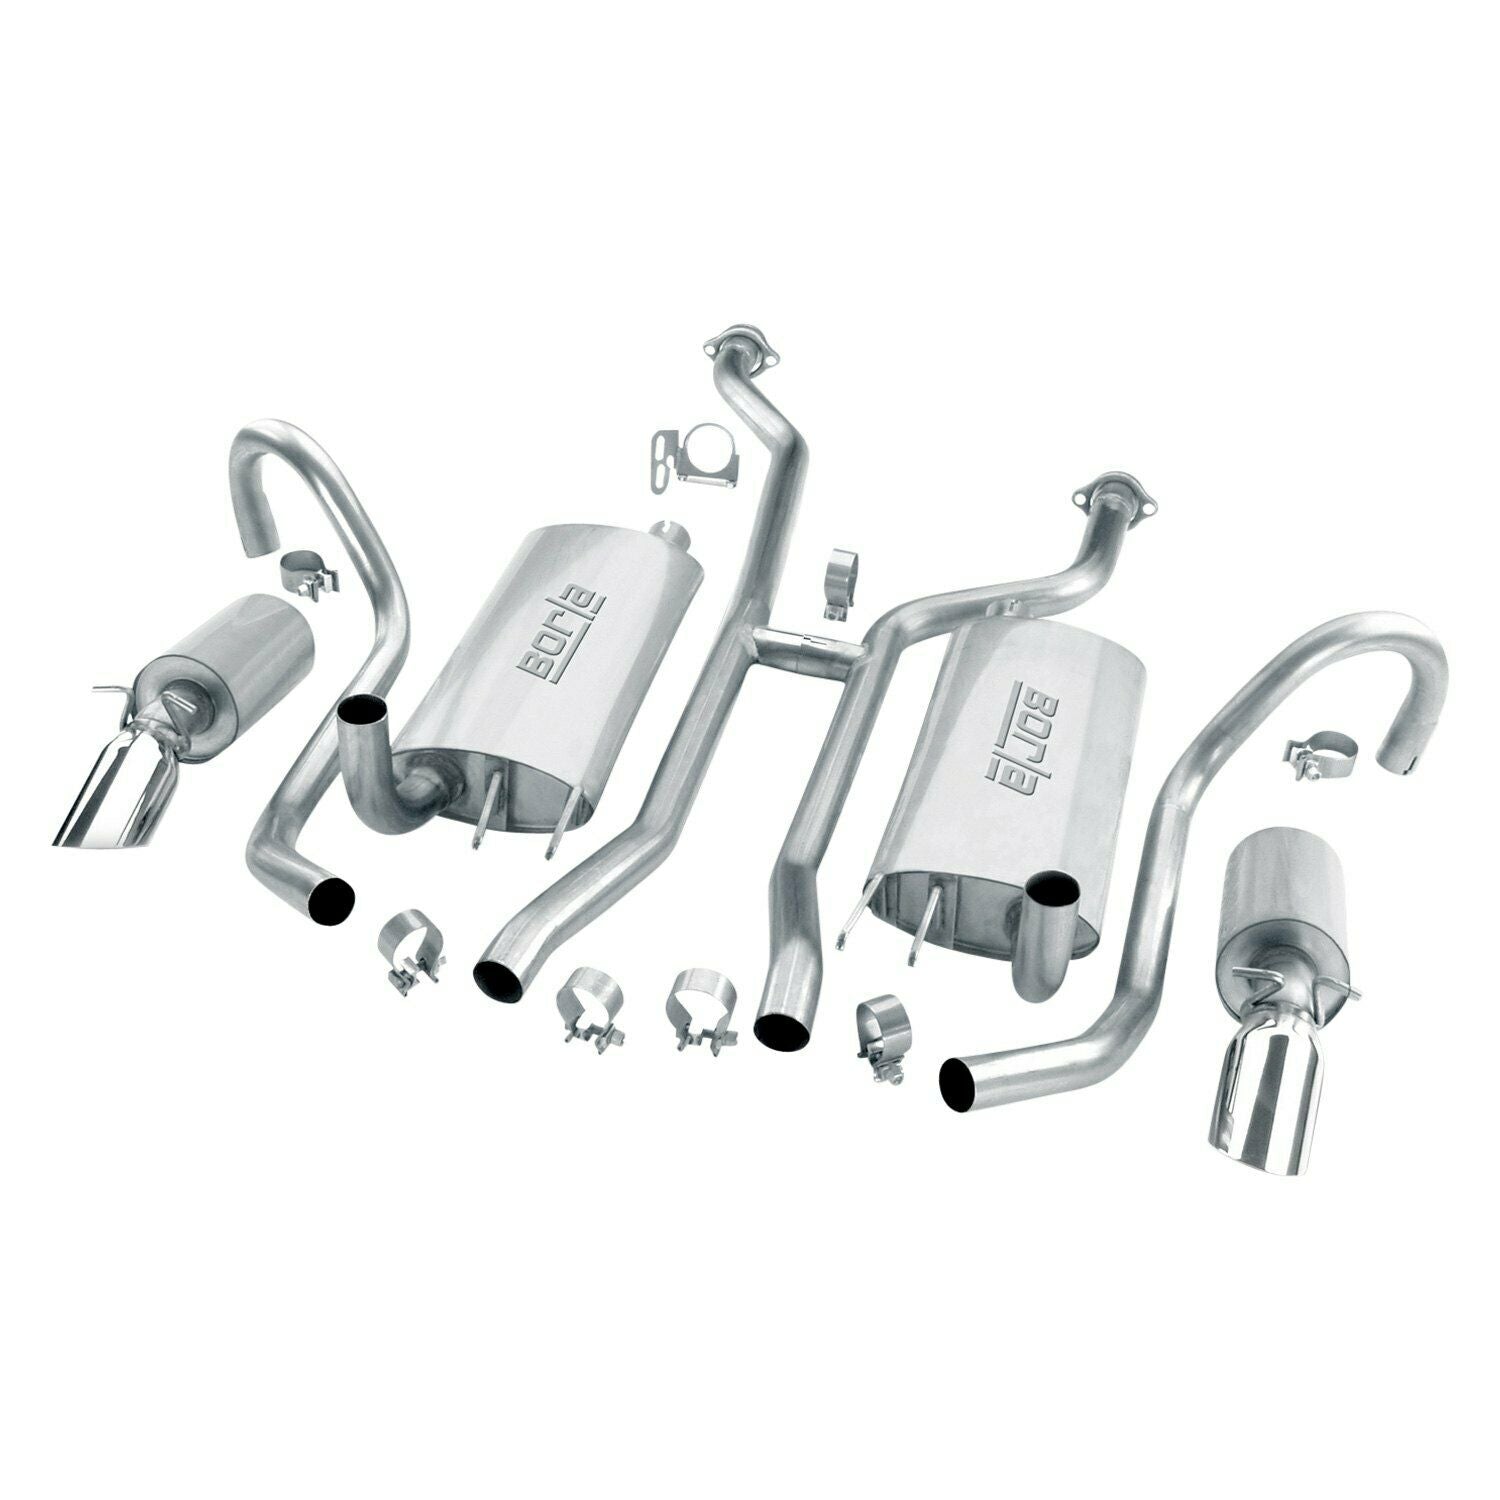 Borla Cat-Back Exhaust Touring For 94-96 Chevy Impala SS/Caprice Classic 5.7L V8